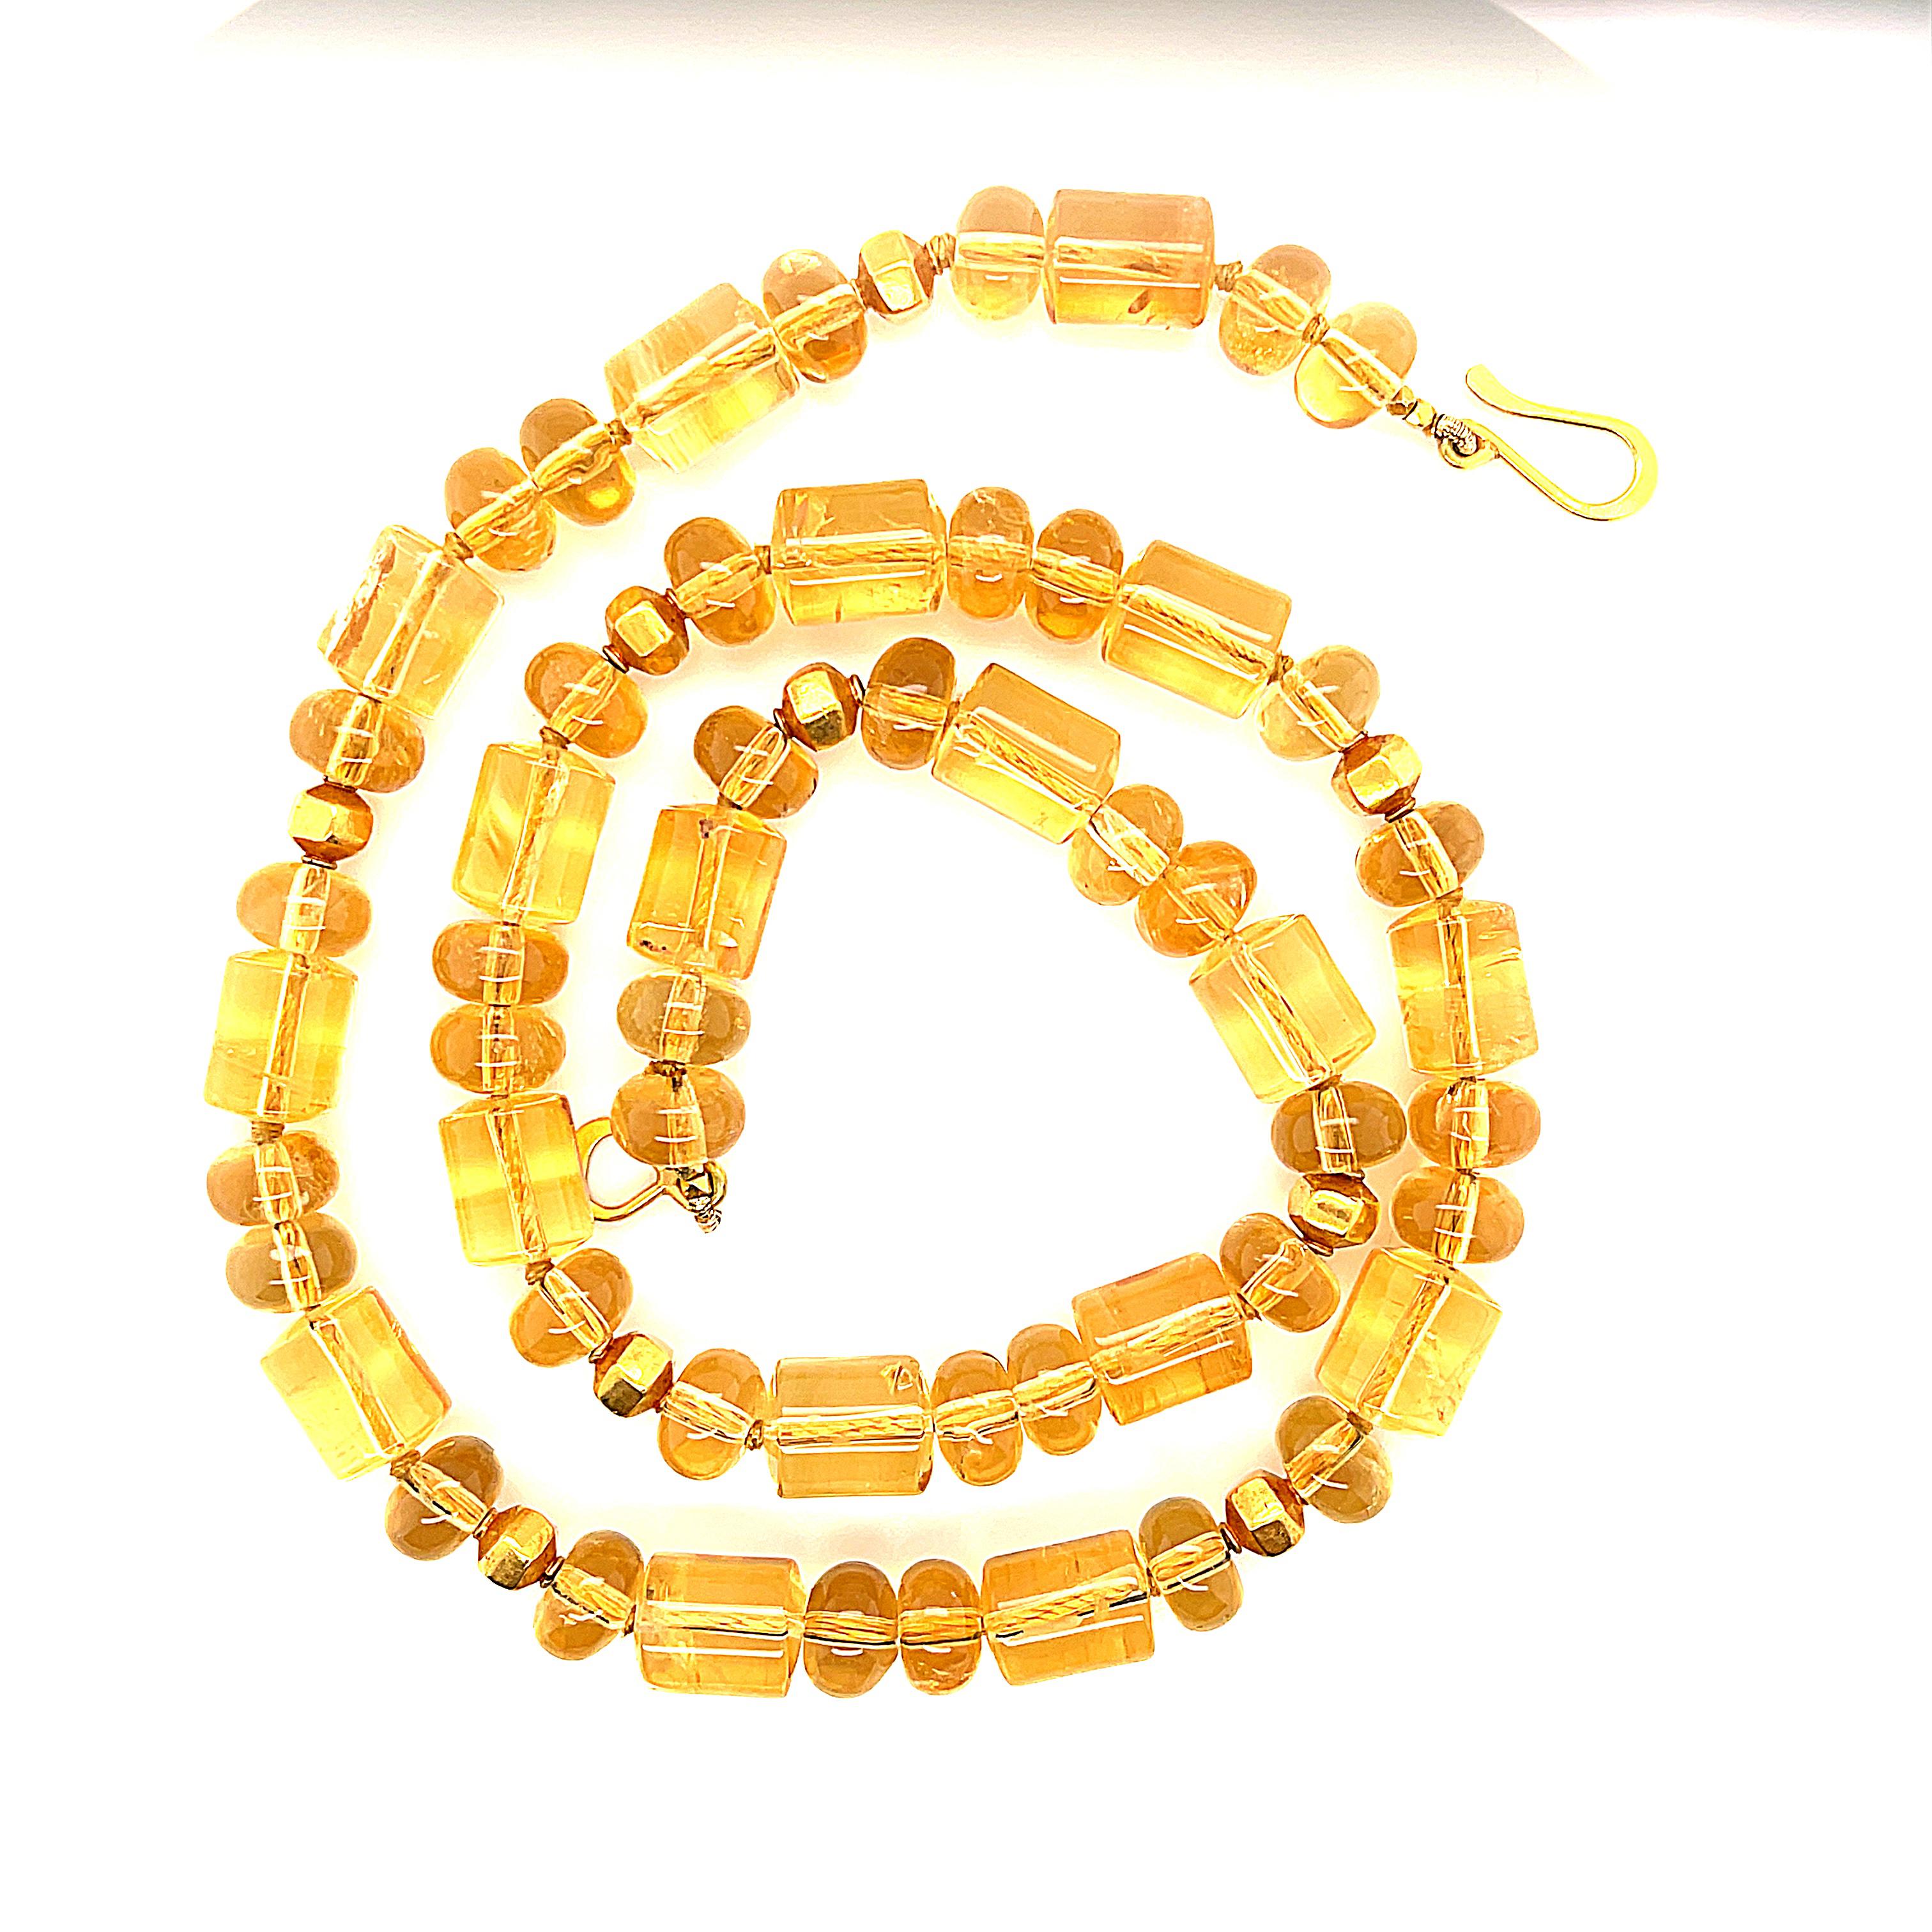 The warm glow of these beautiful citrine beads brings sunshine to everyday life! This golden strand of barrel-shaped and oval citrine beads has been carefully strung with 18k and 22k yellow gold accents, elevating this necklace to new heights.